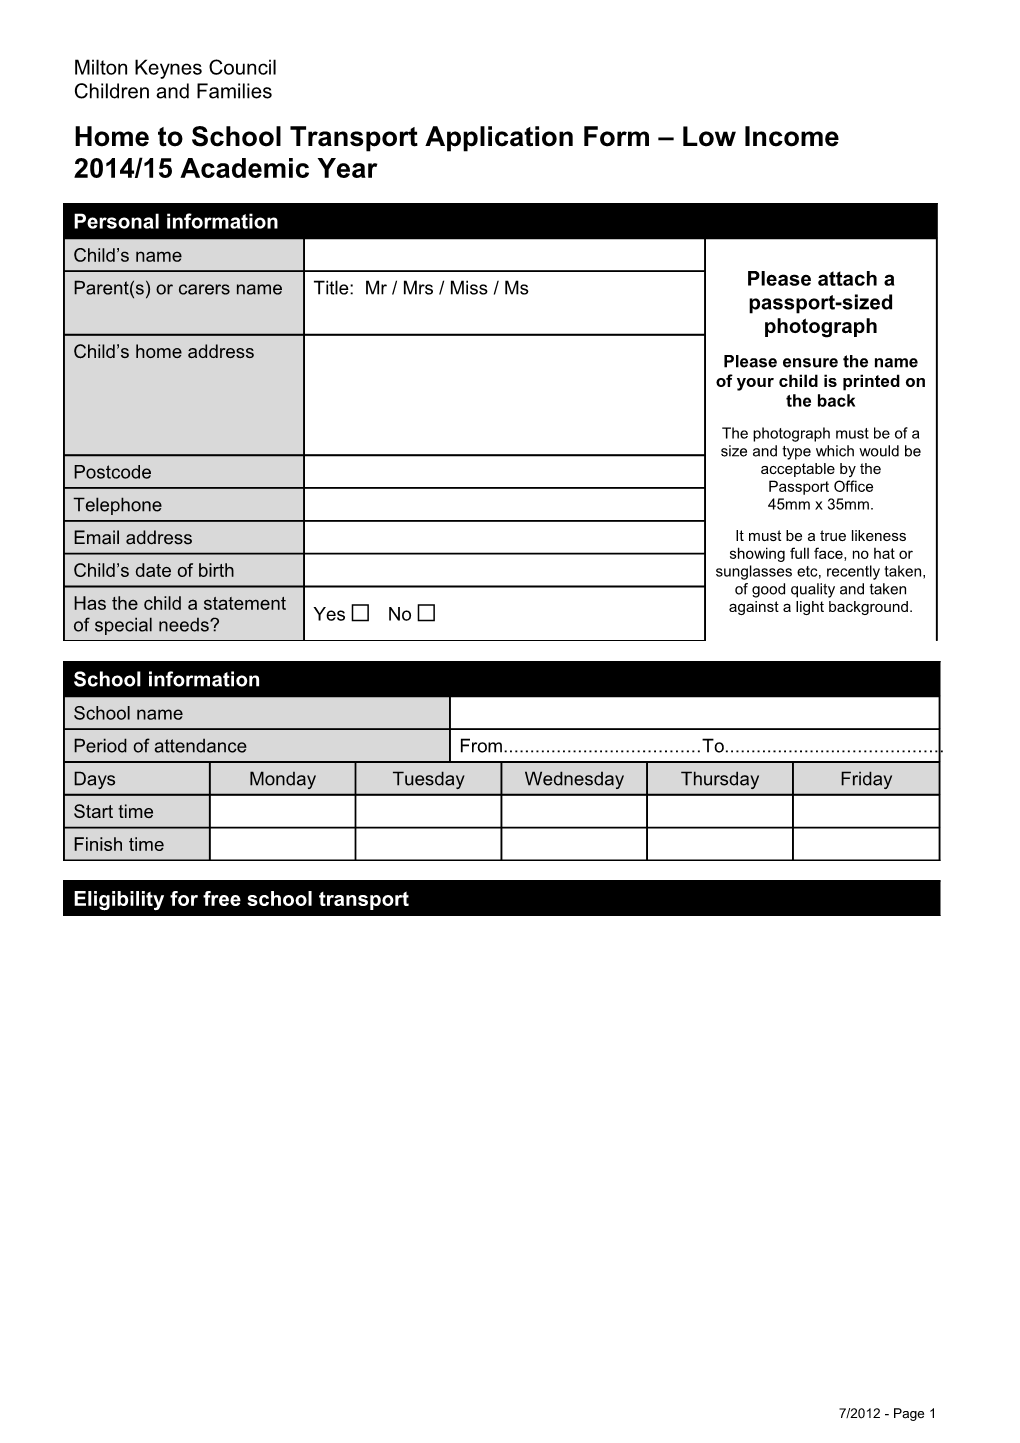 Application Form for Transport for a Young Person Under 16 Years of Age with Special Educational